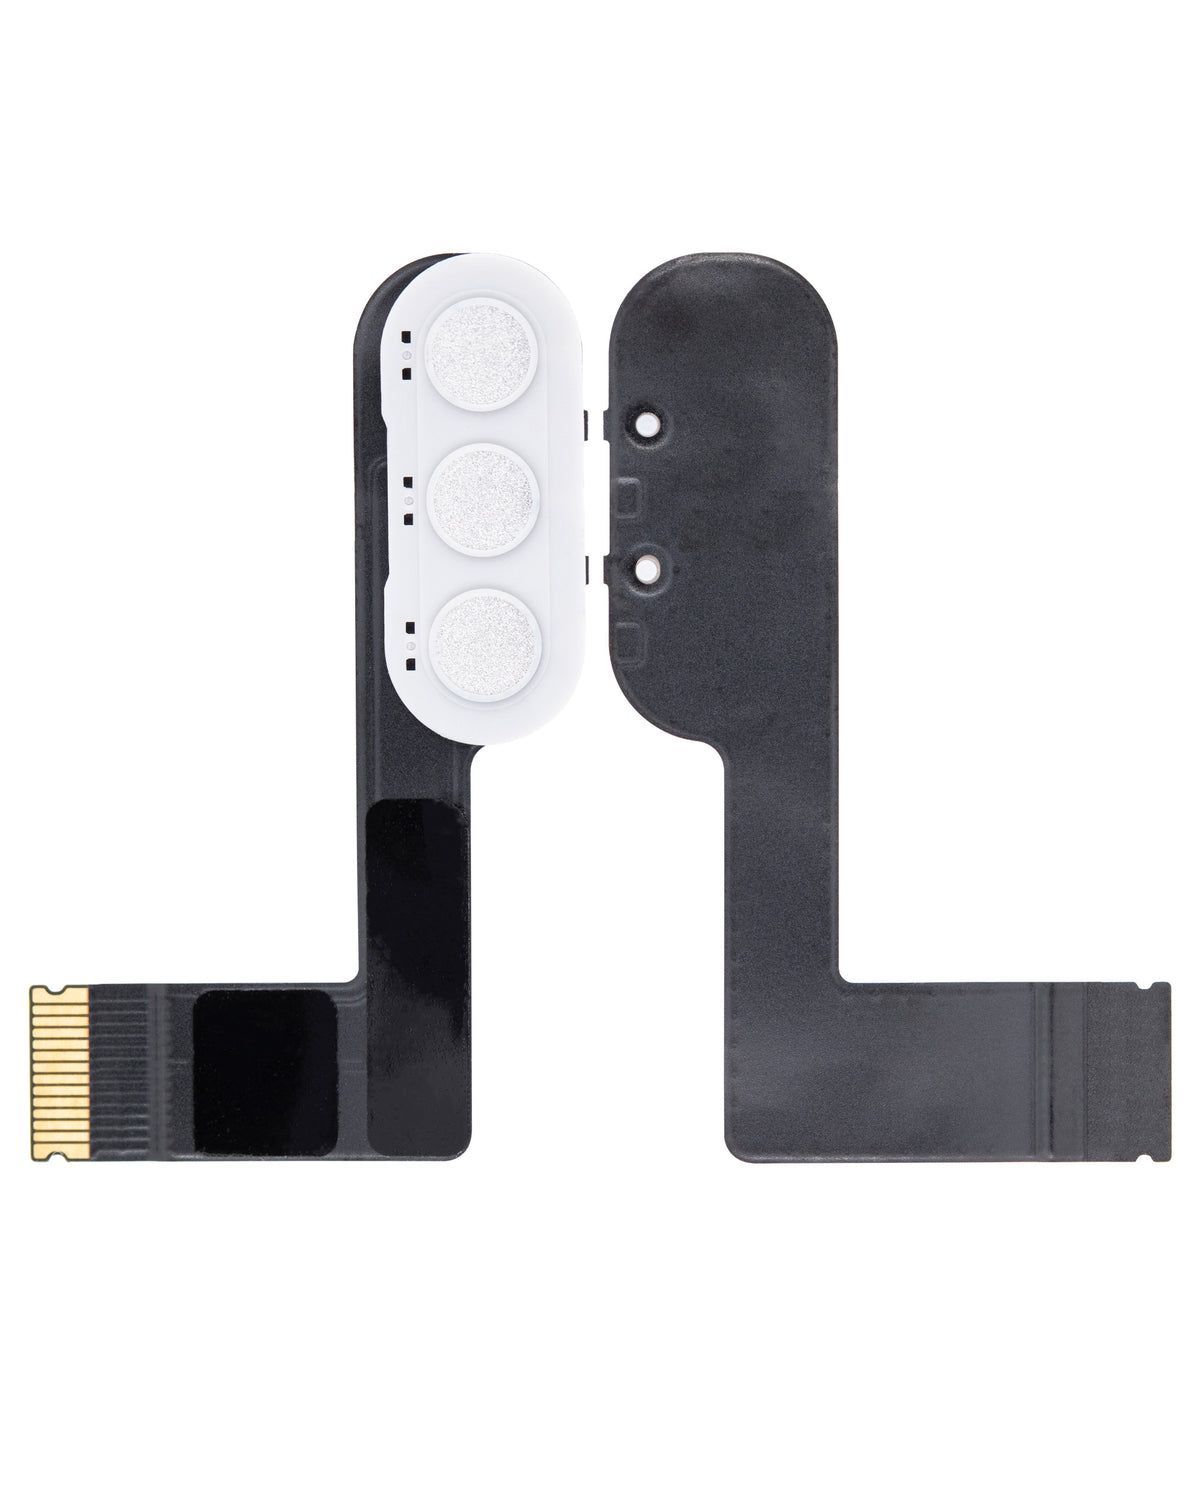 KEYBOARD FLEX CABLE COMPATIBLE FOR IPAD AIR 4 - SILVER